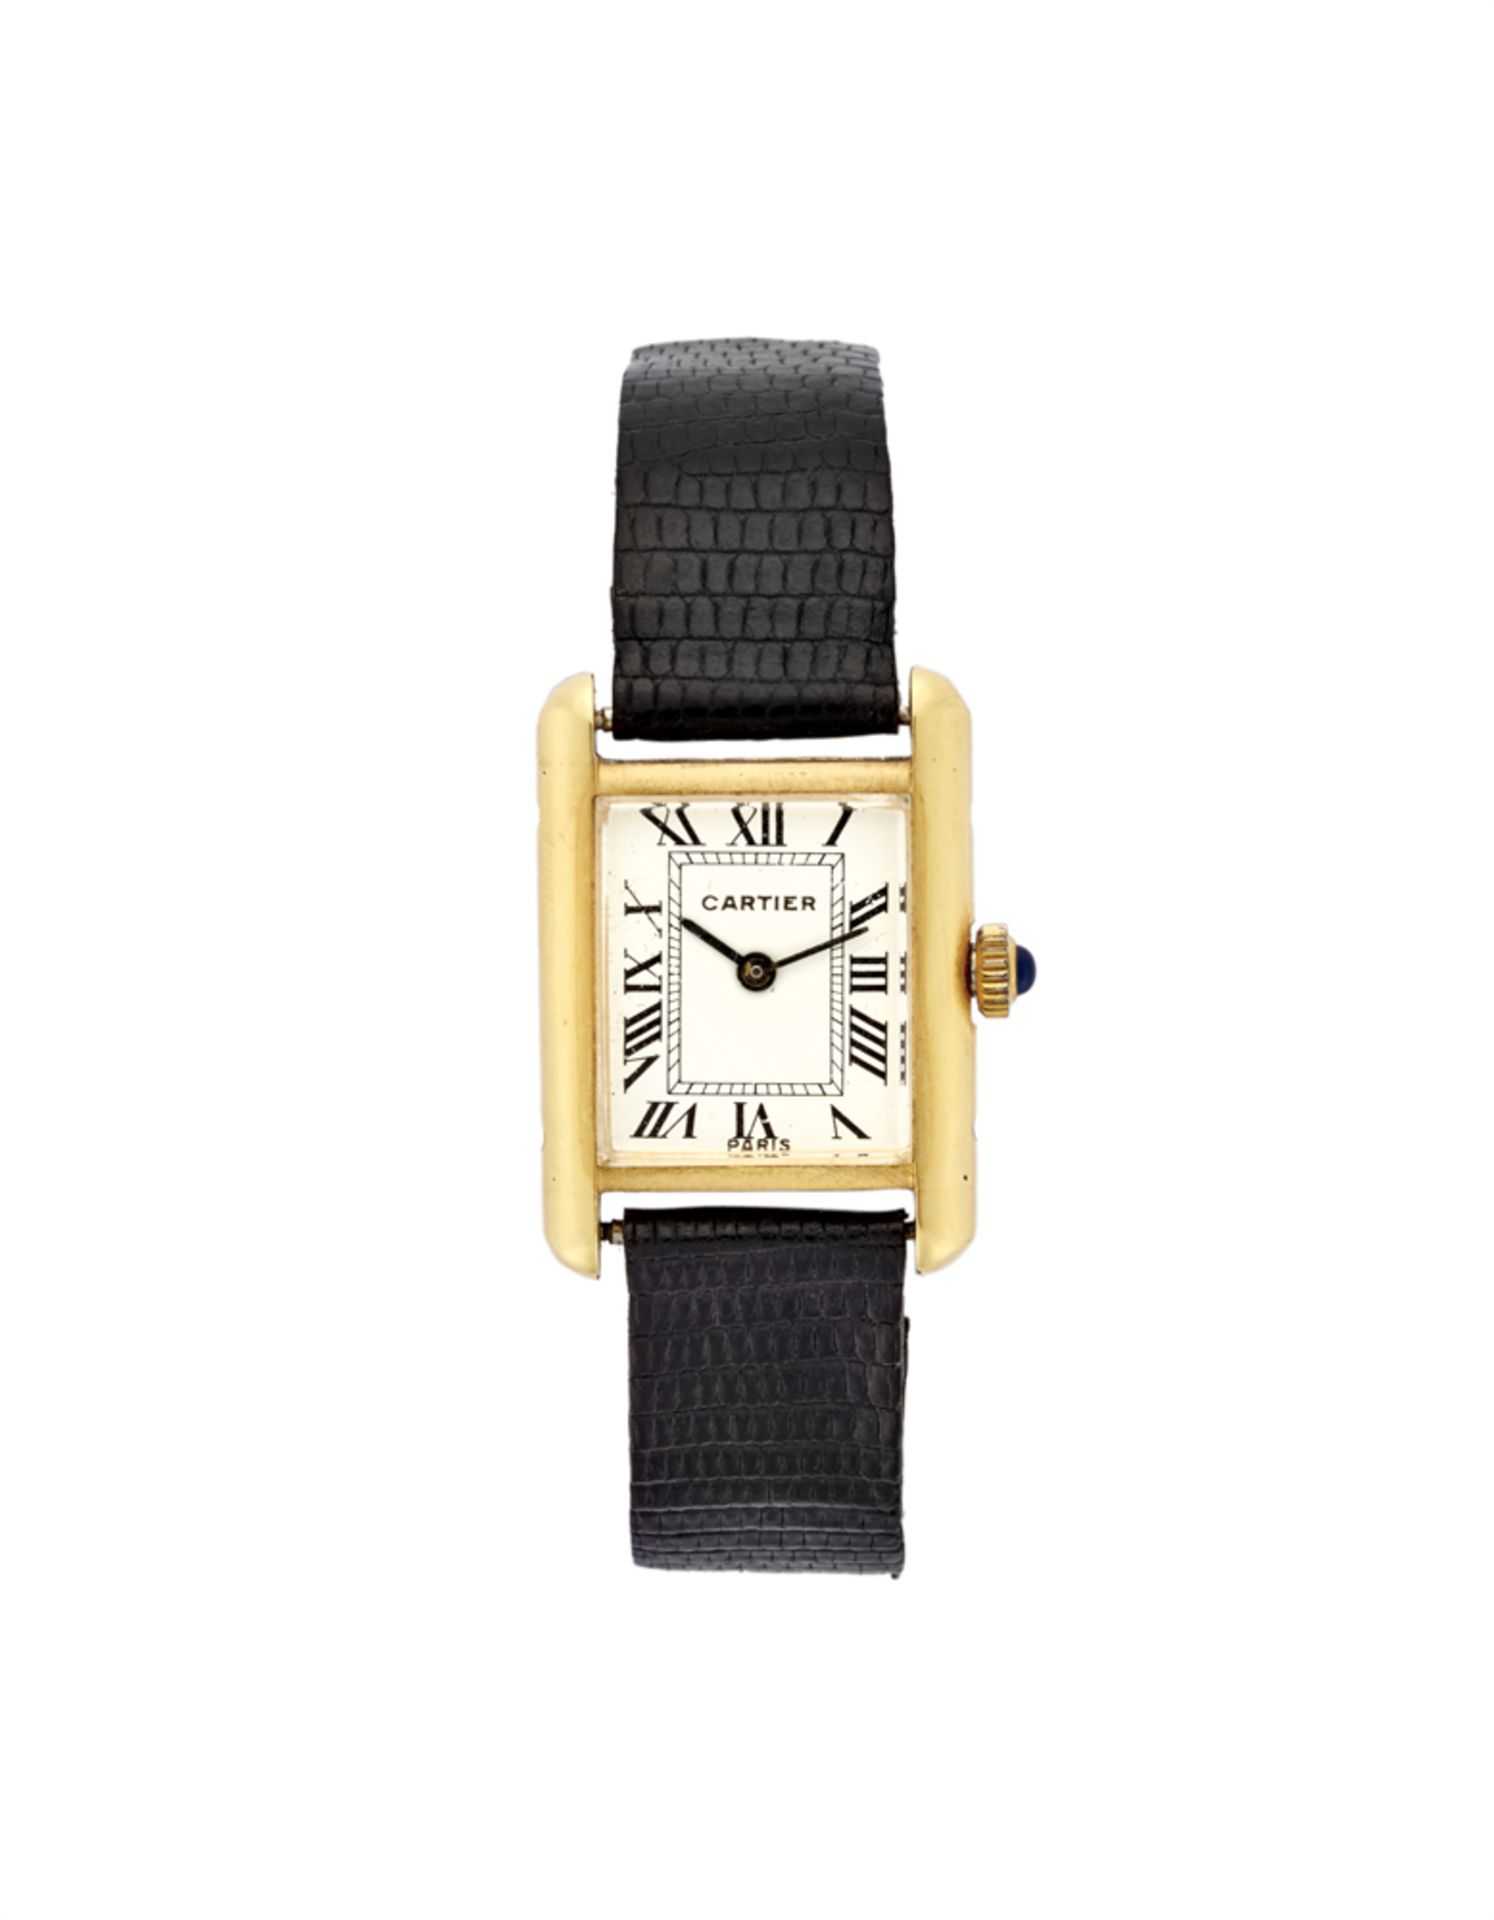 CARTIER Lady's 18K gold wristwatch1950s/1960sDial, movement and case signedManual-wind movementWhite